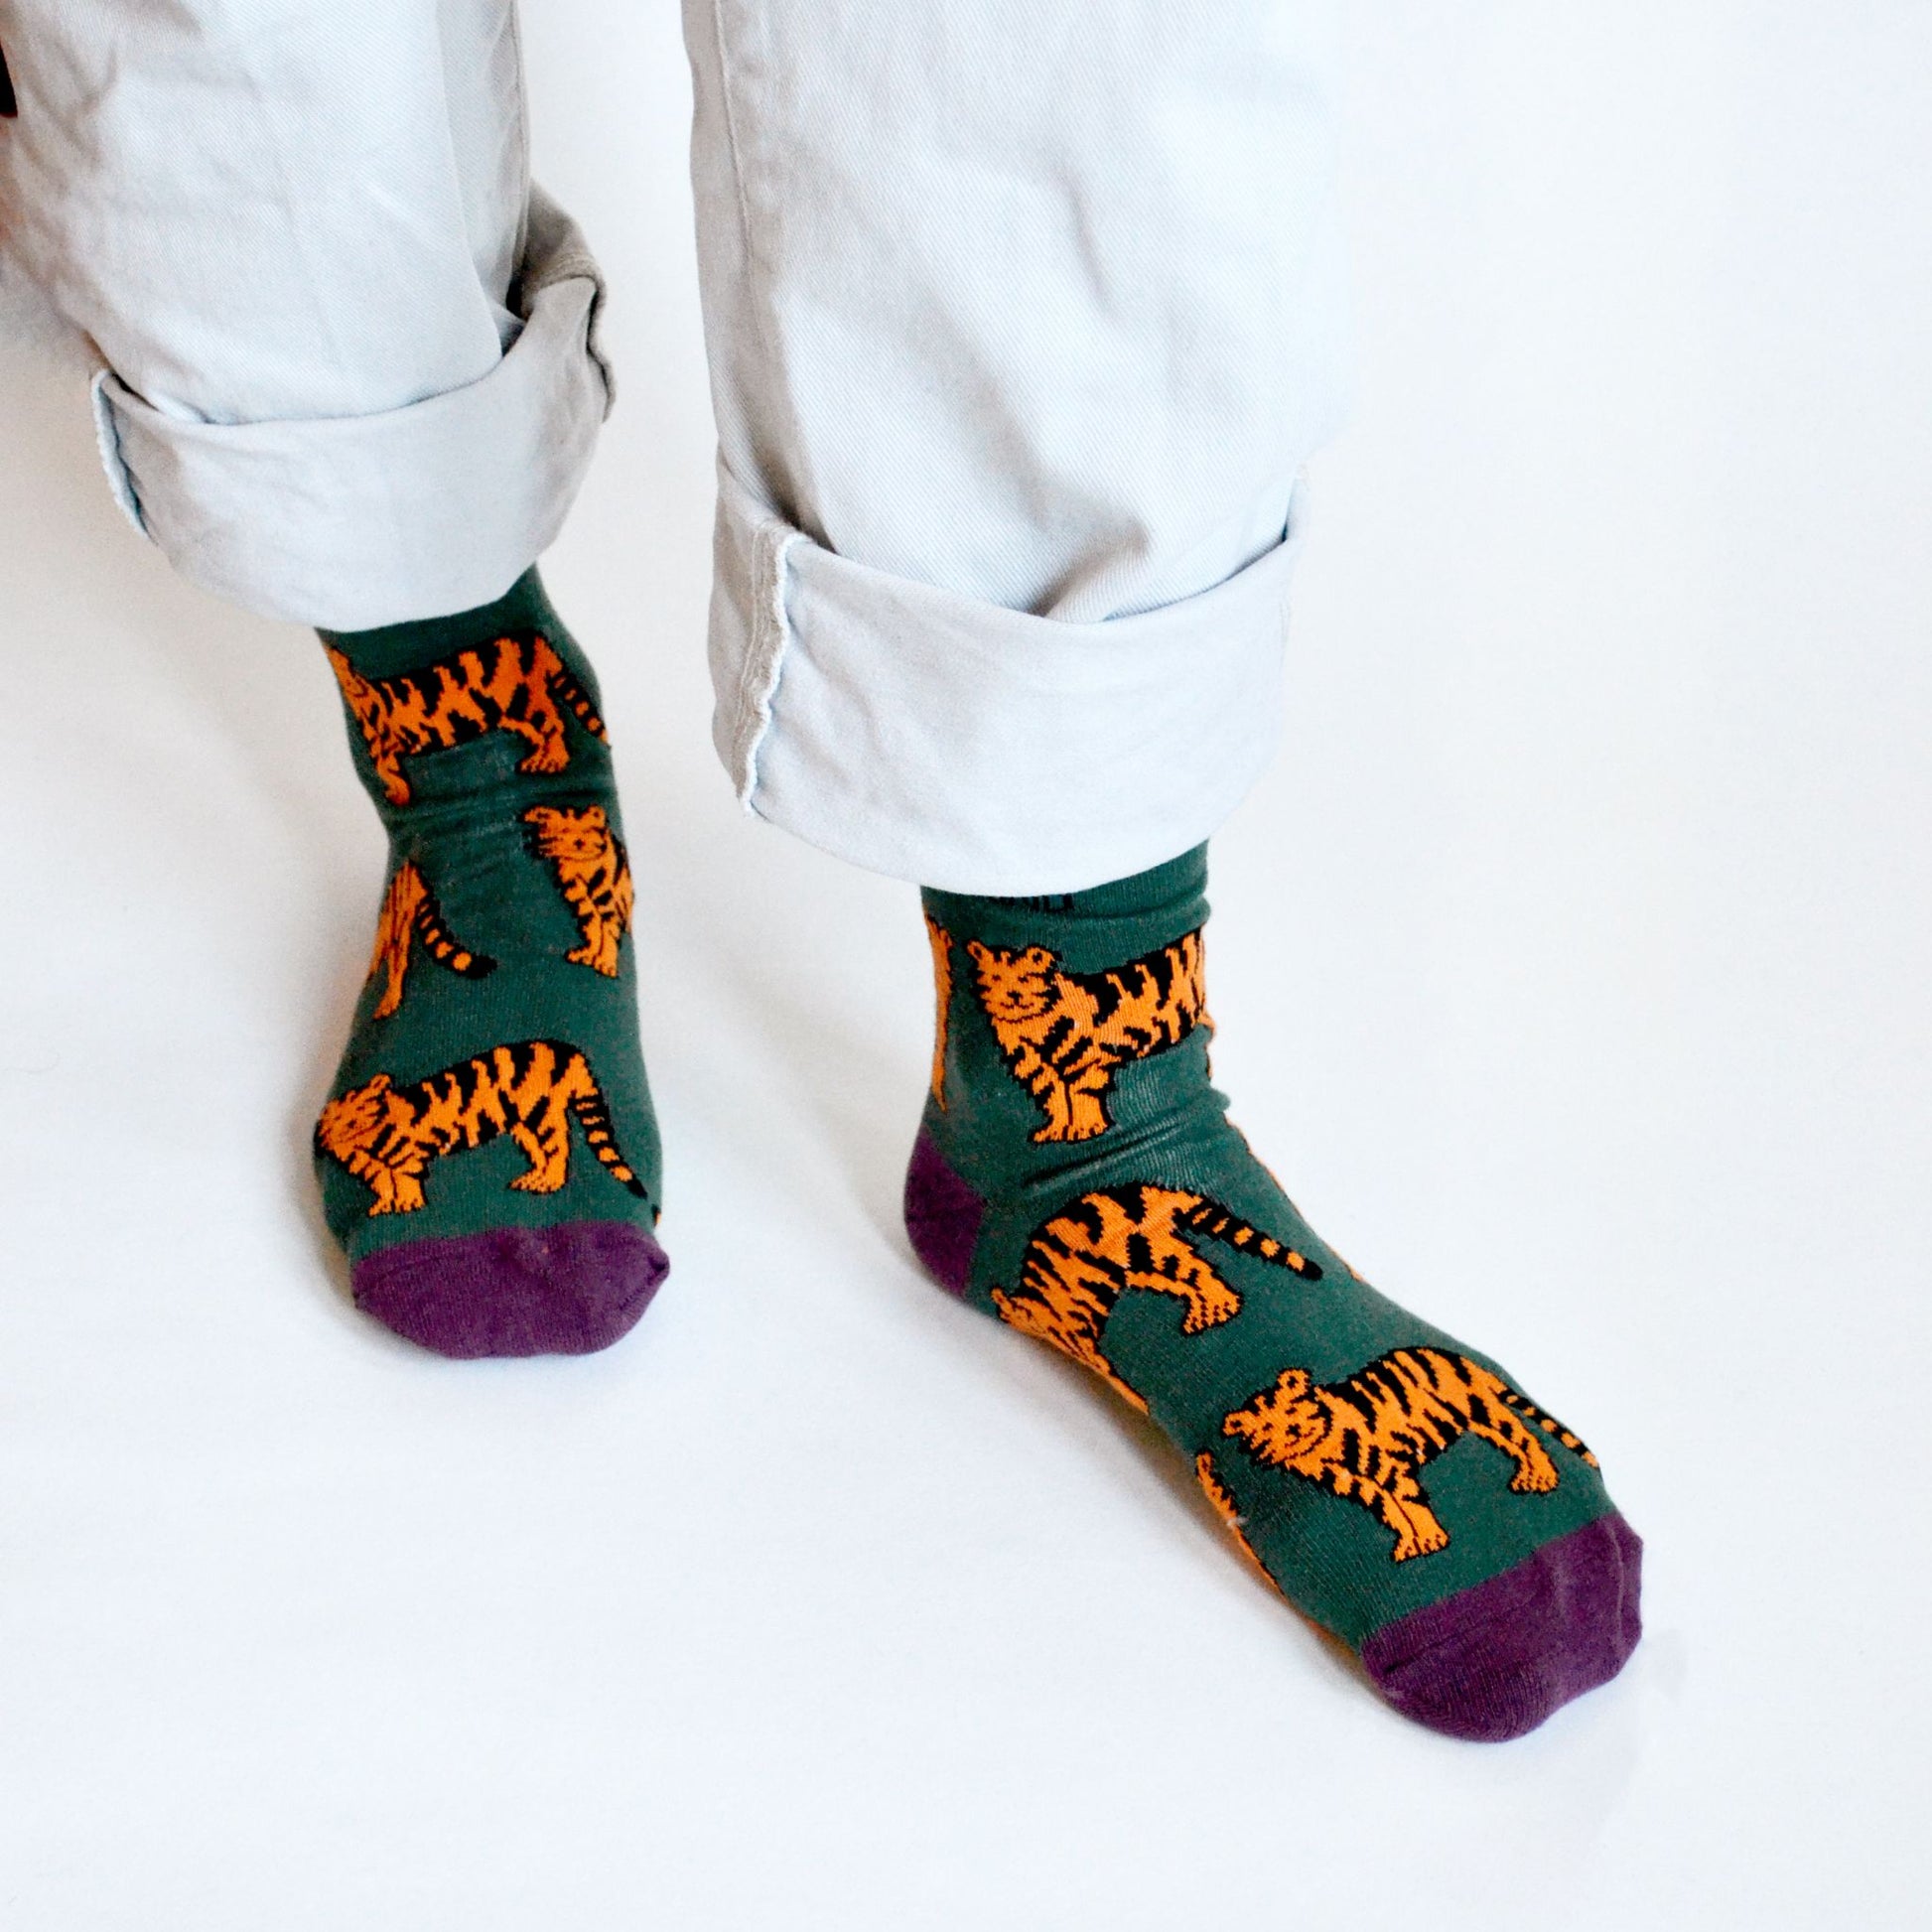 Socks Protecting Tigers - Bamboo Socks in 2 Adult Sizes